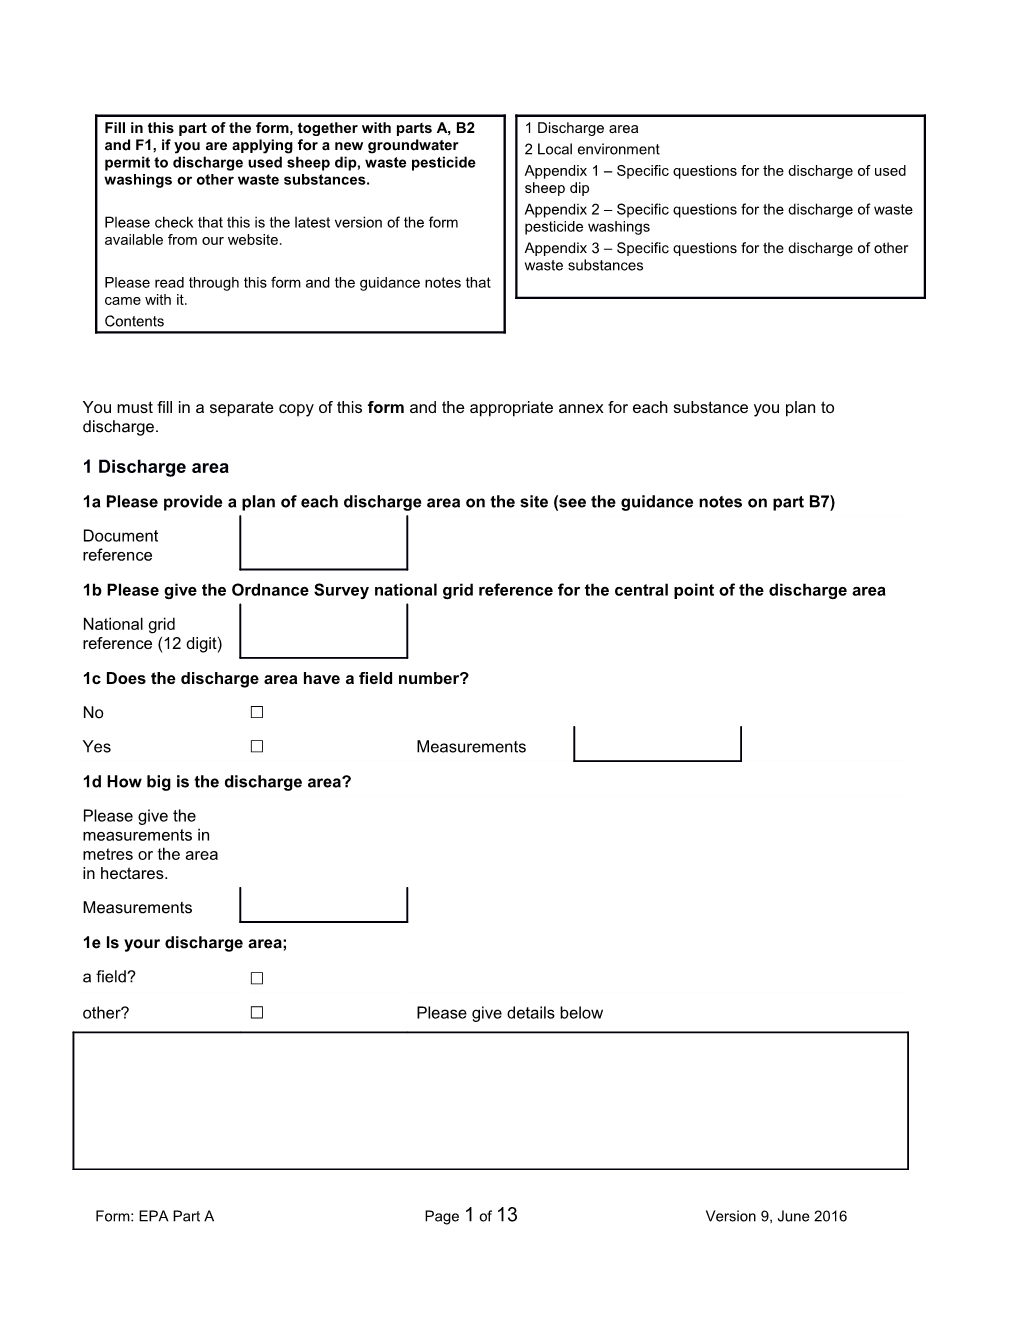 Fill in This Part of the Form, Together with Parts A, B2 and F1, If You Are Applying For